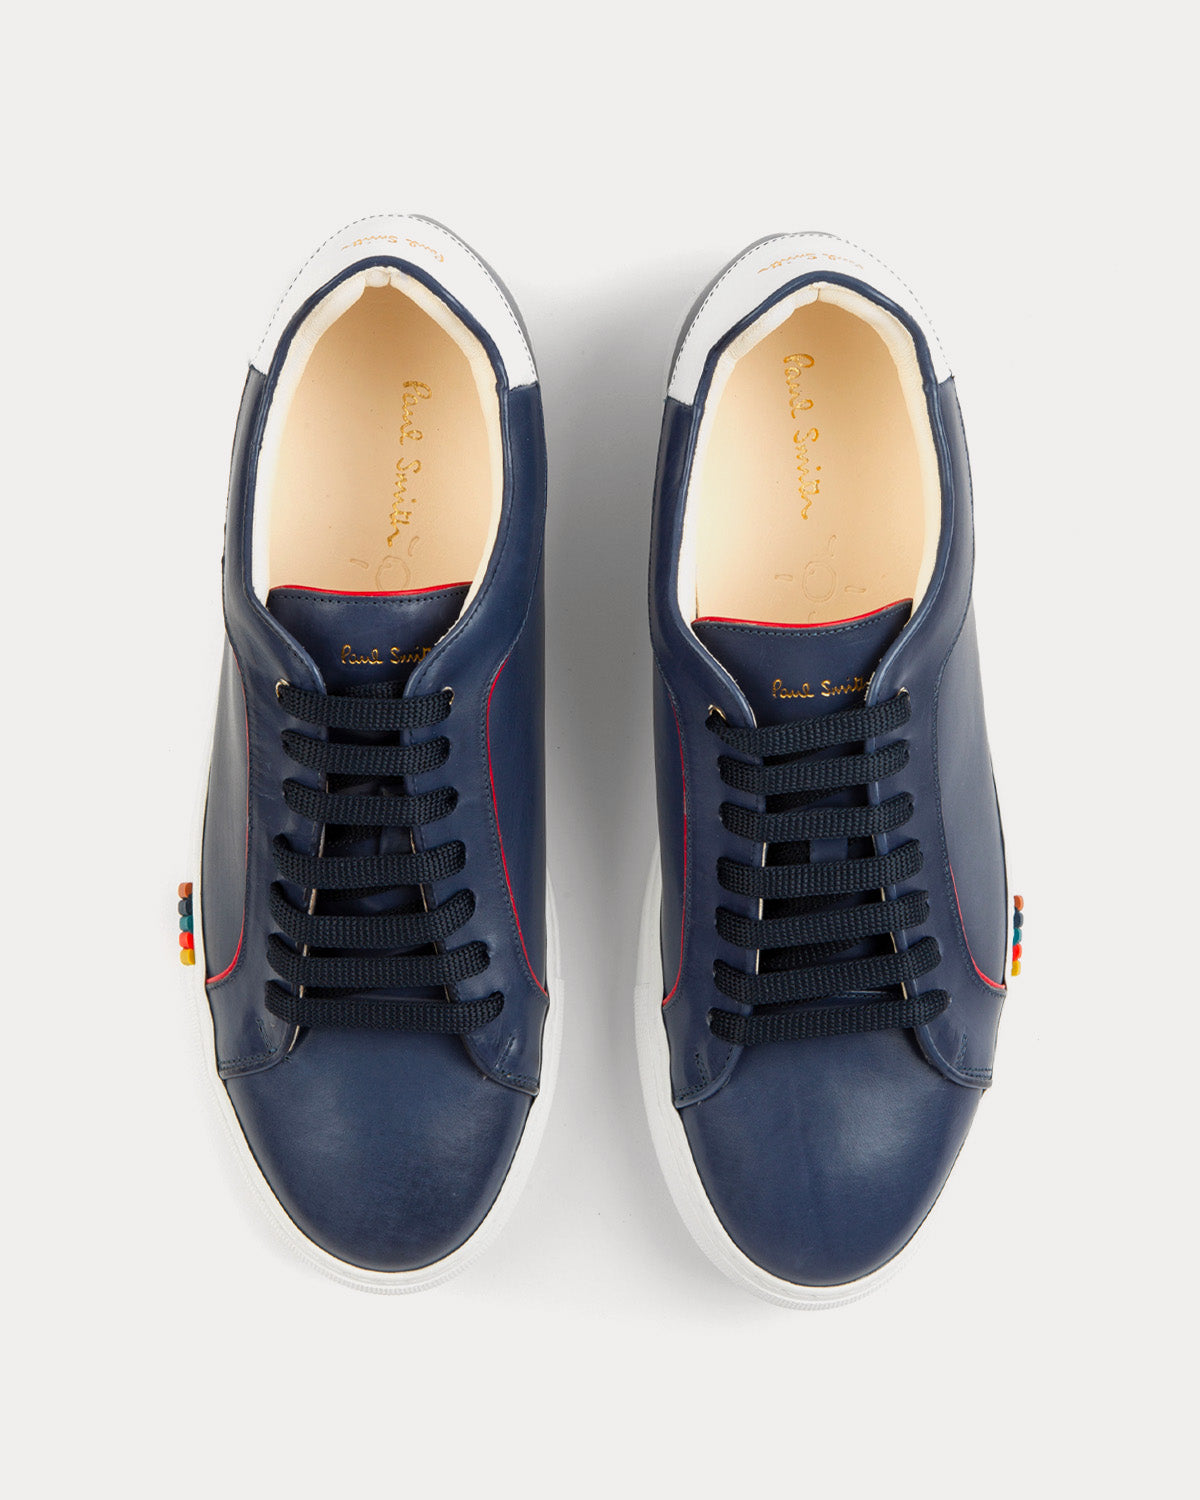 Paul Smith - Basso with Red Trim Navy Low Top Sneakers